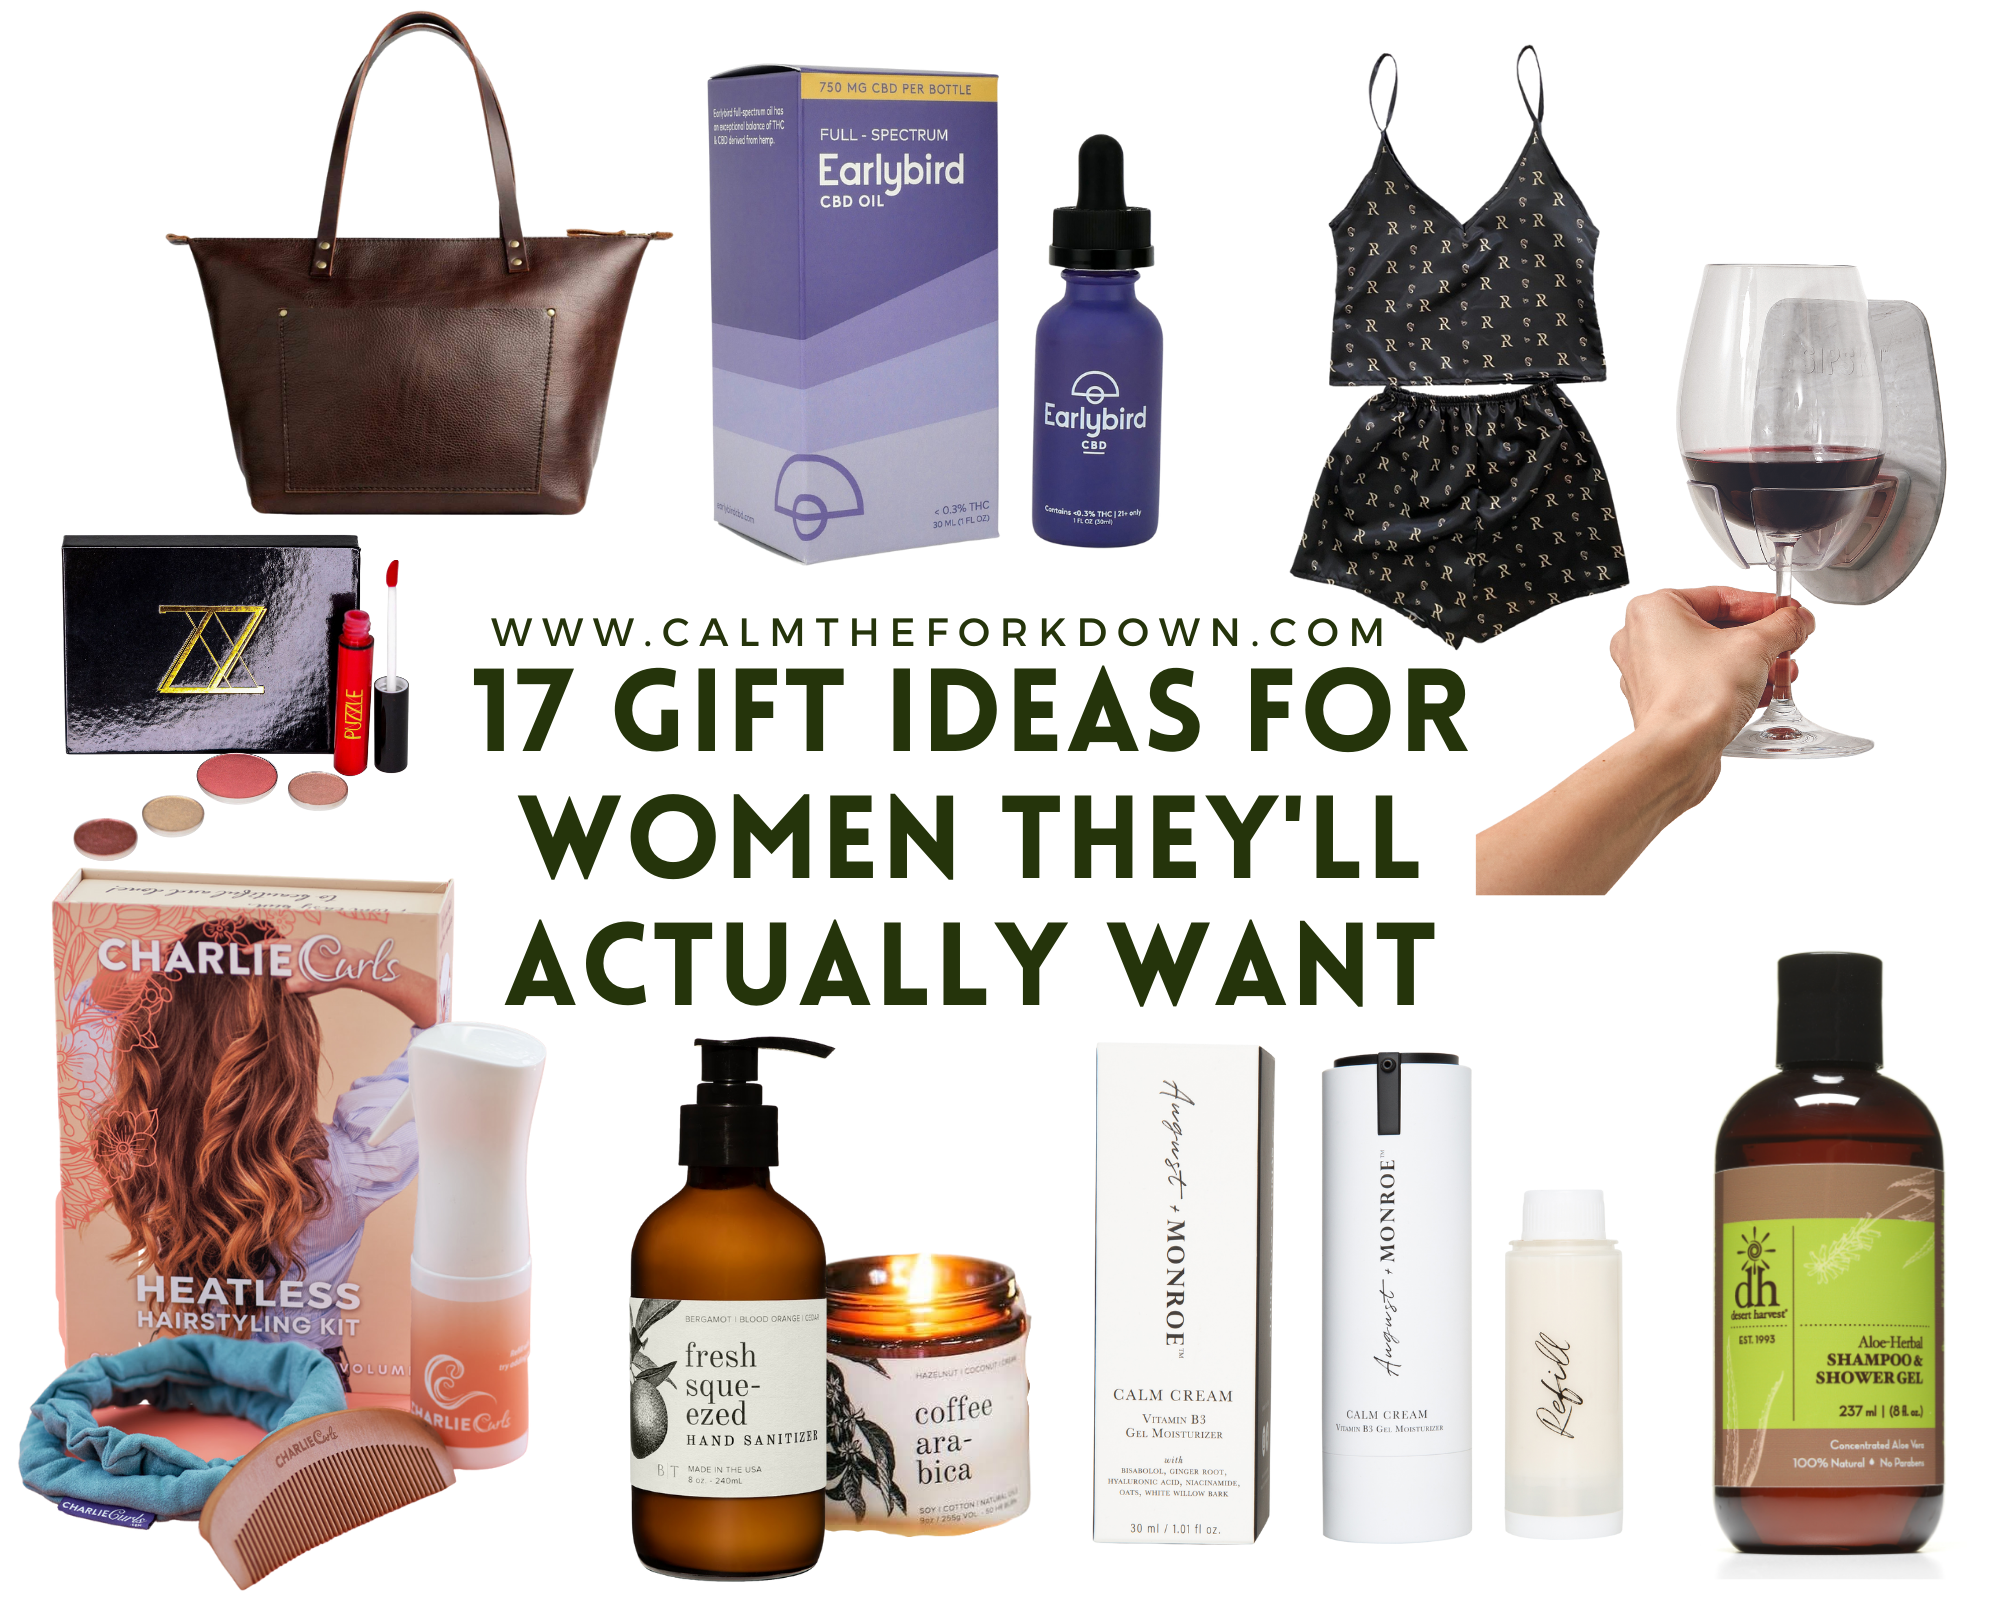 17 Gift Ideas for Women They'll Actually Want